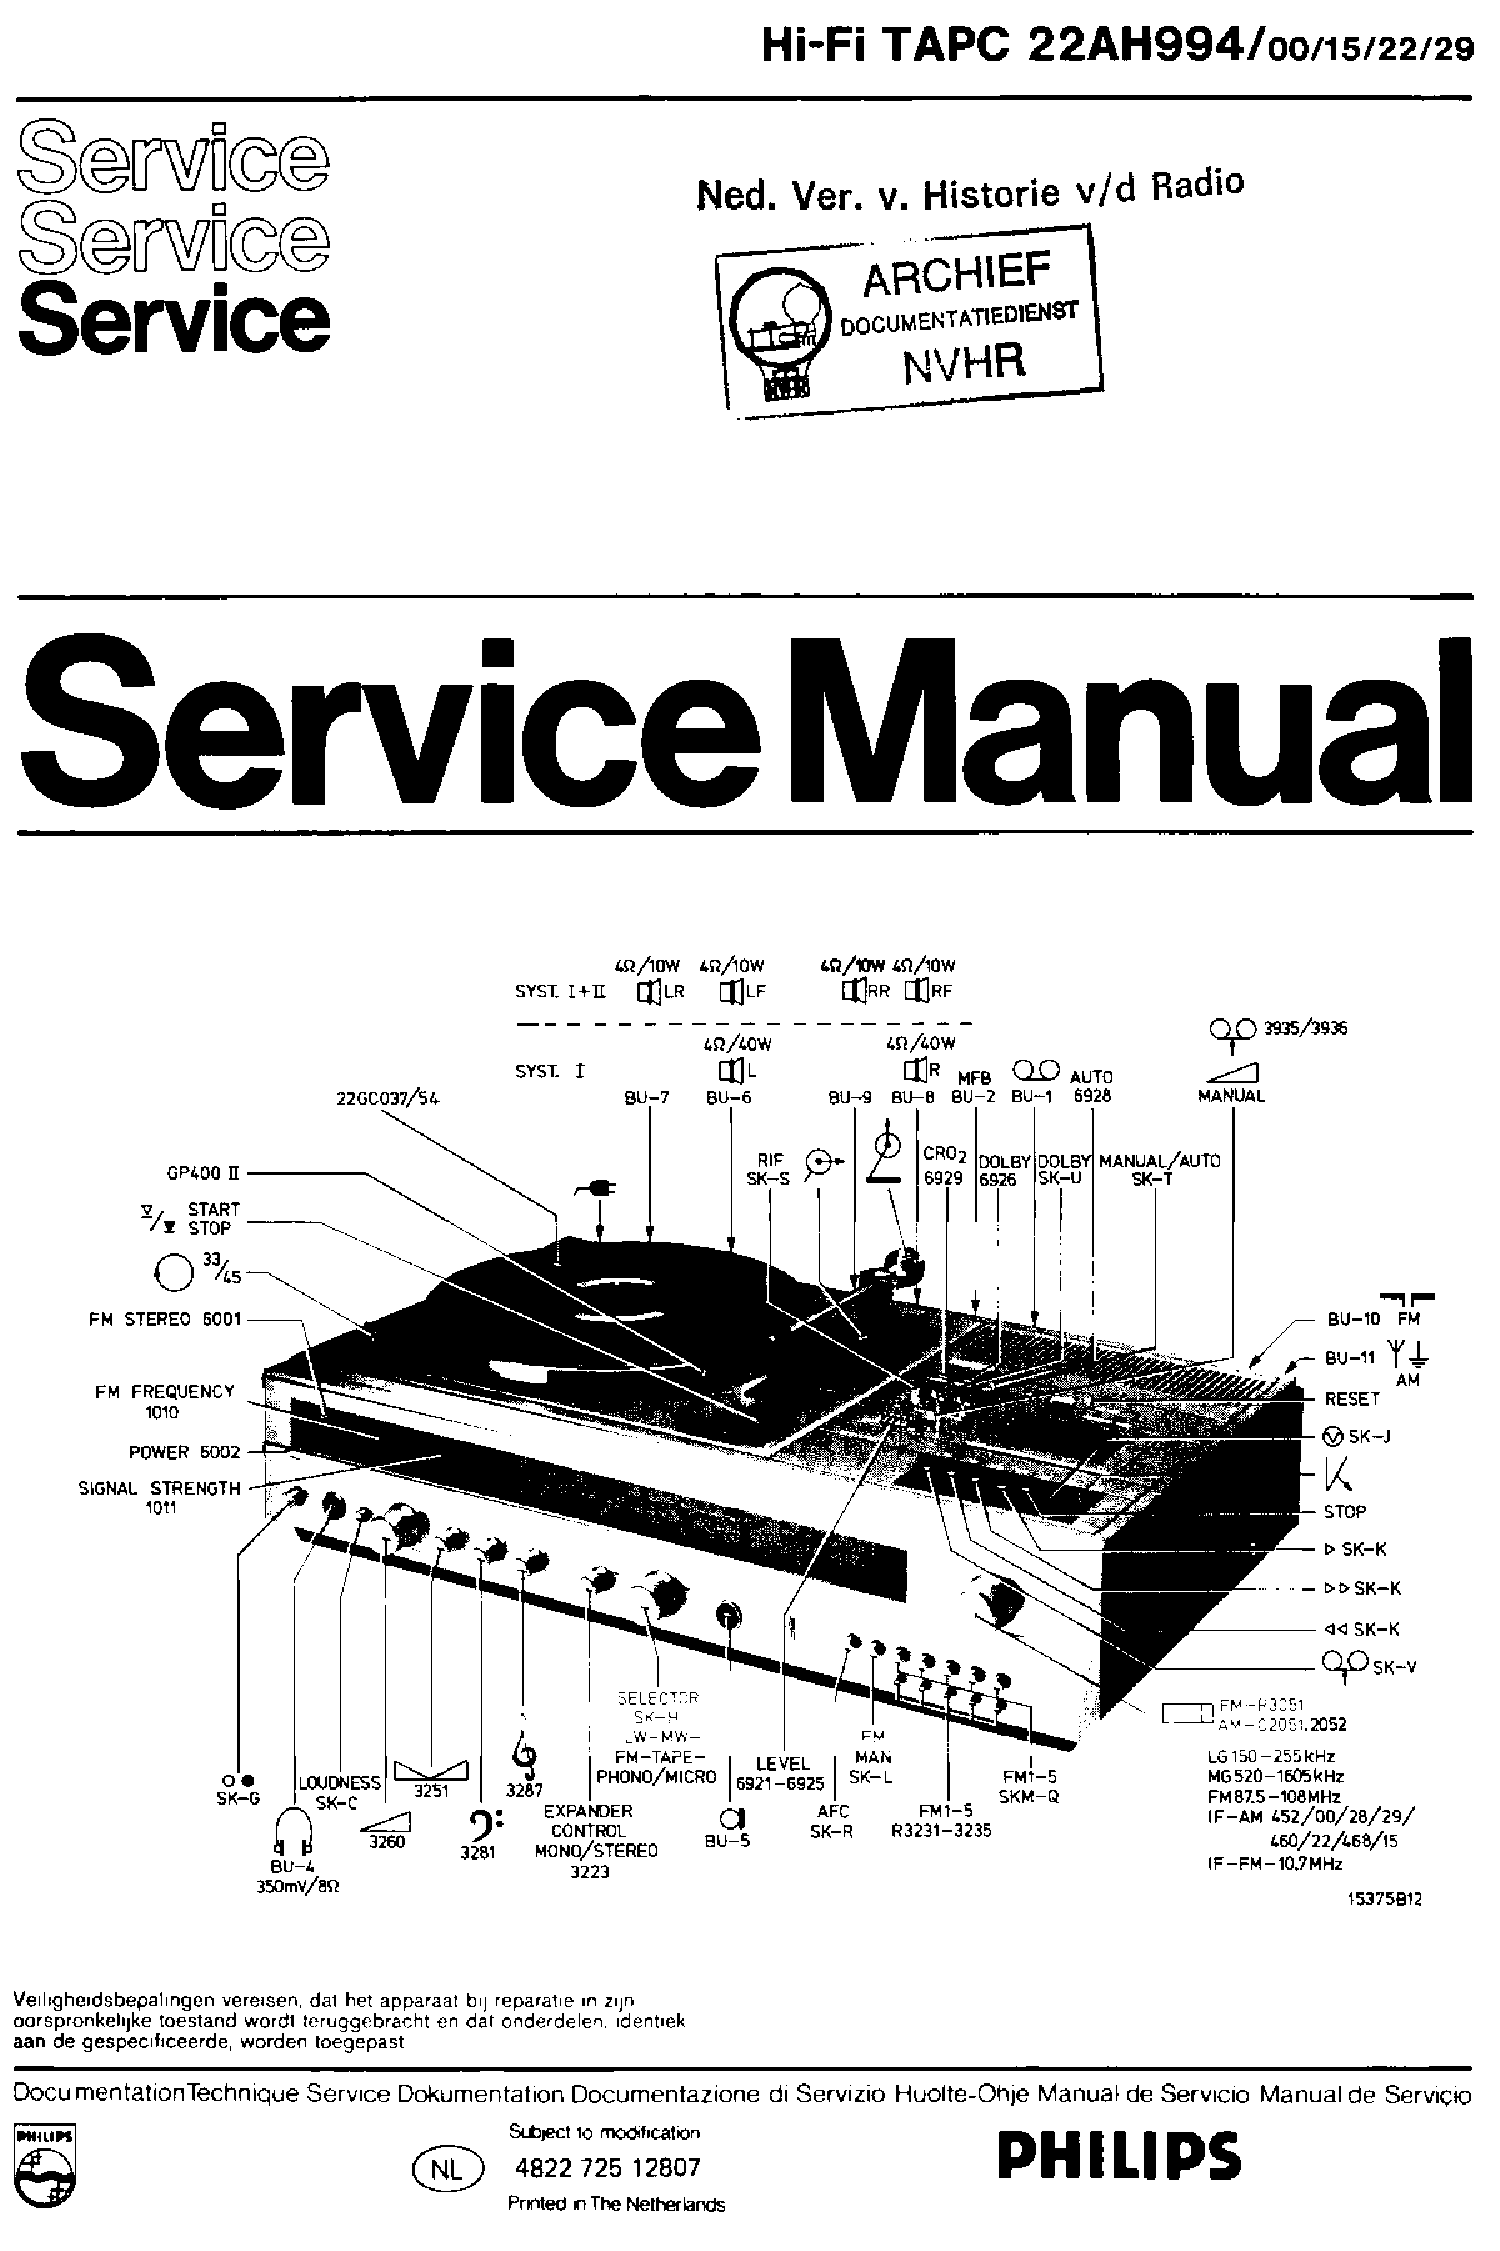 PHILIPS 22AH994-00-15-22-29 HIFI STEREO CASSETTE RADIO RECORD PLAYER SM service manual (1st page)